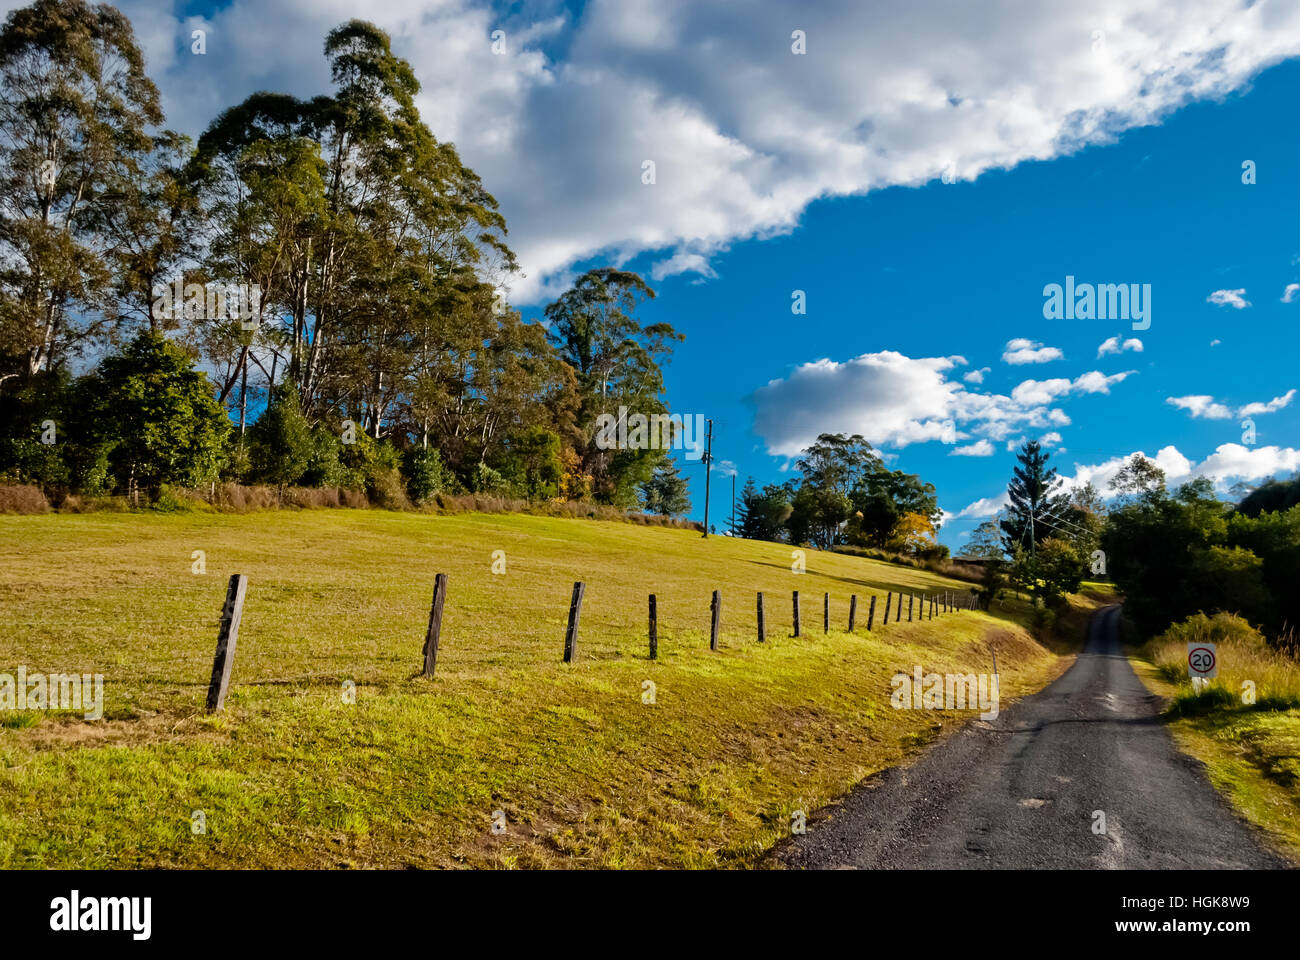 Road in a peaceful rural landscape Stock Photo